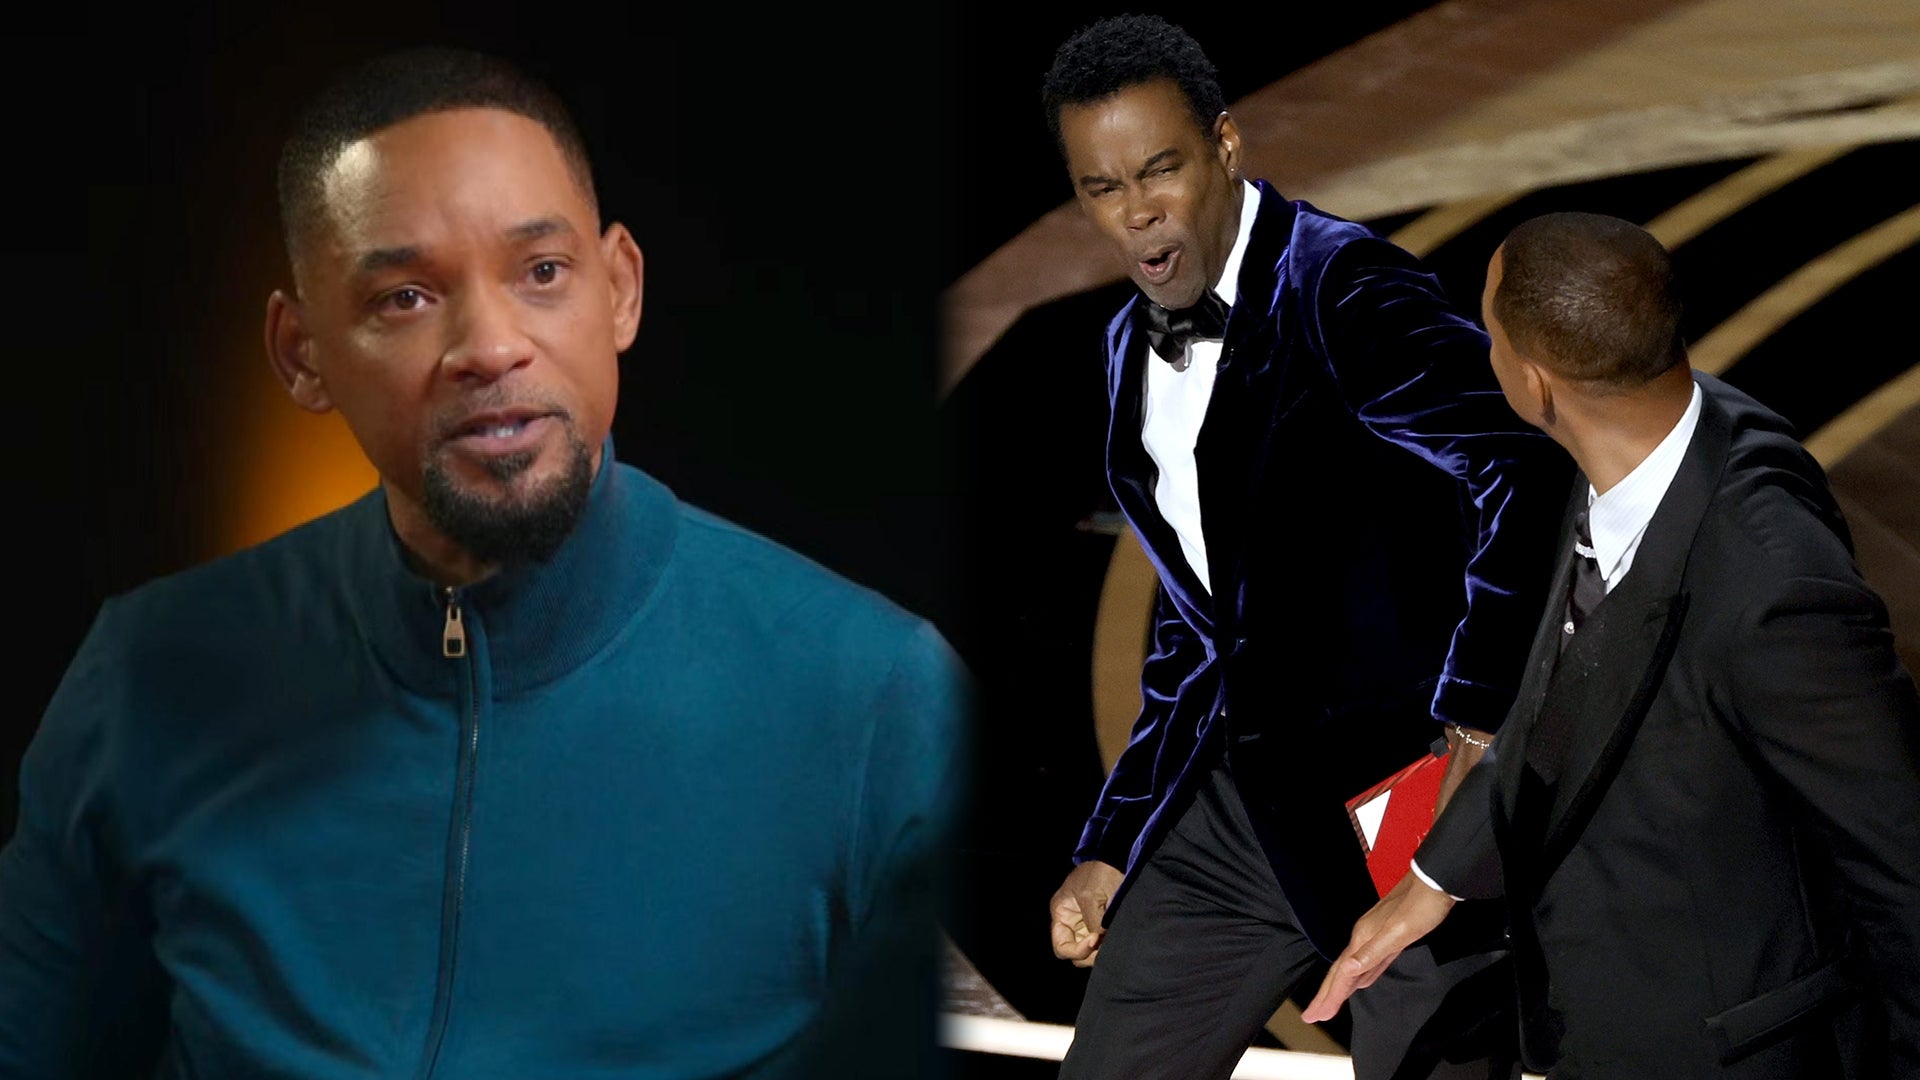 Will Smith Predicted Losing His Career During Ayahuasca Hallucination Before Oscars Slap